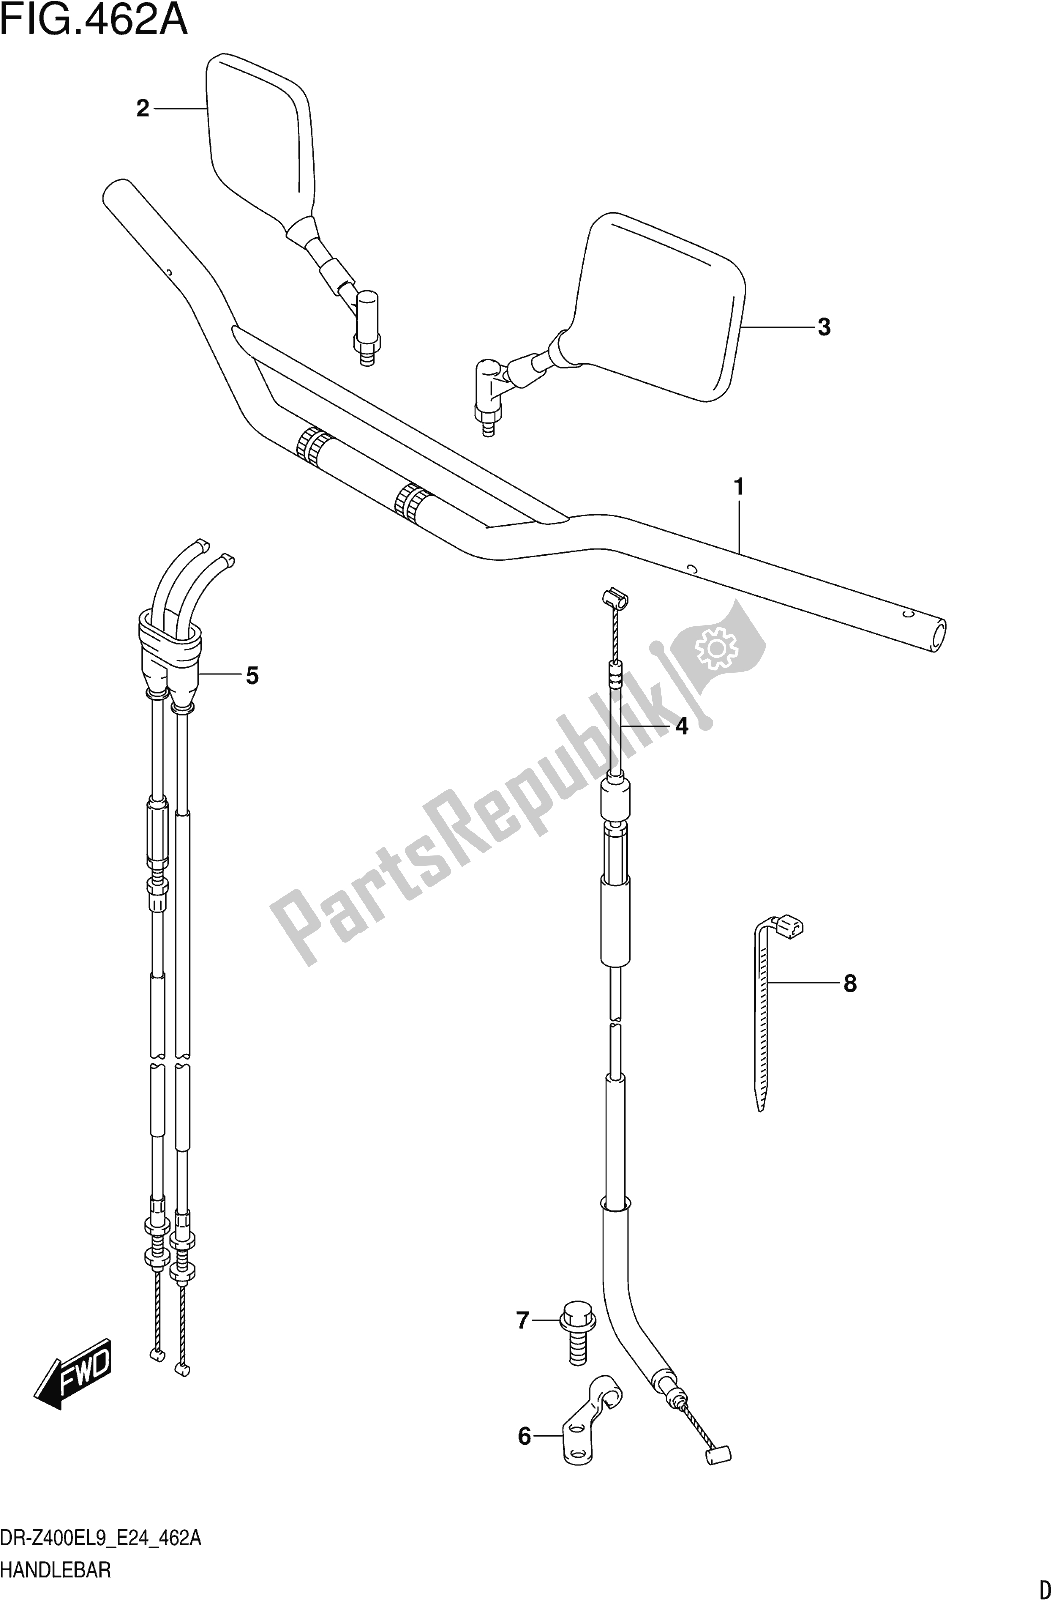 All parts for the Fig. 462a Handlebar of the Suzuki DR-Z 400E 2019